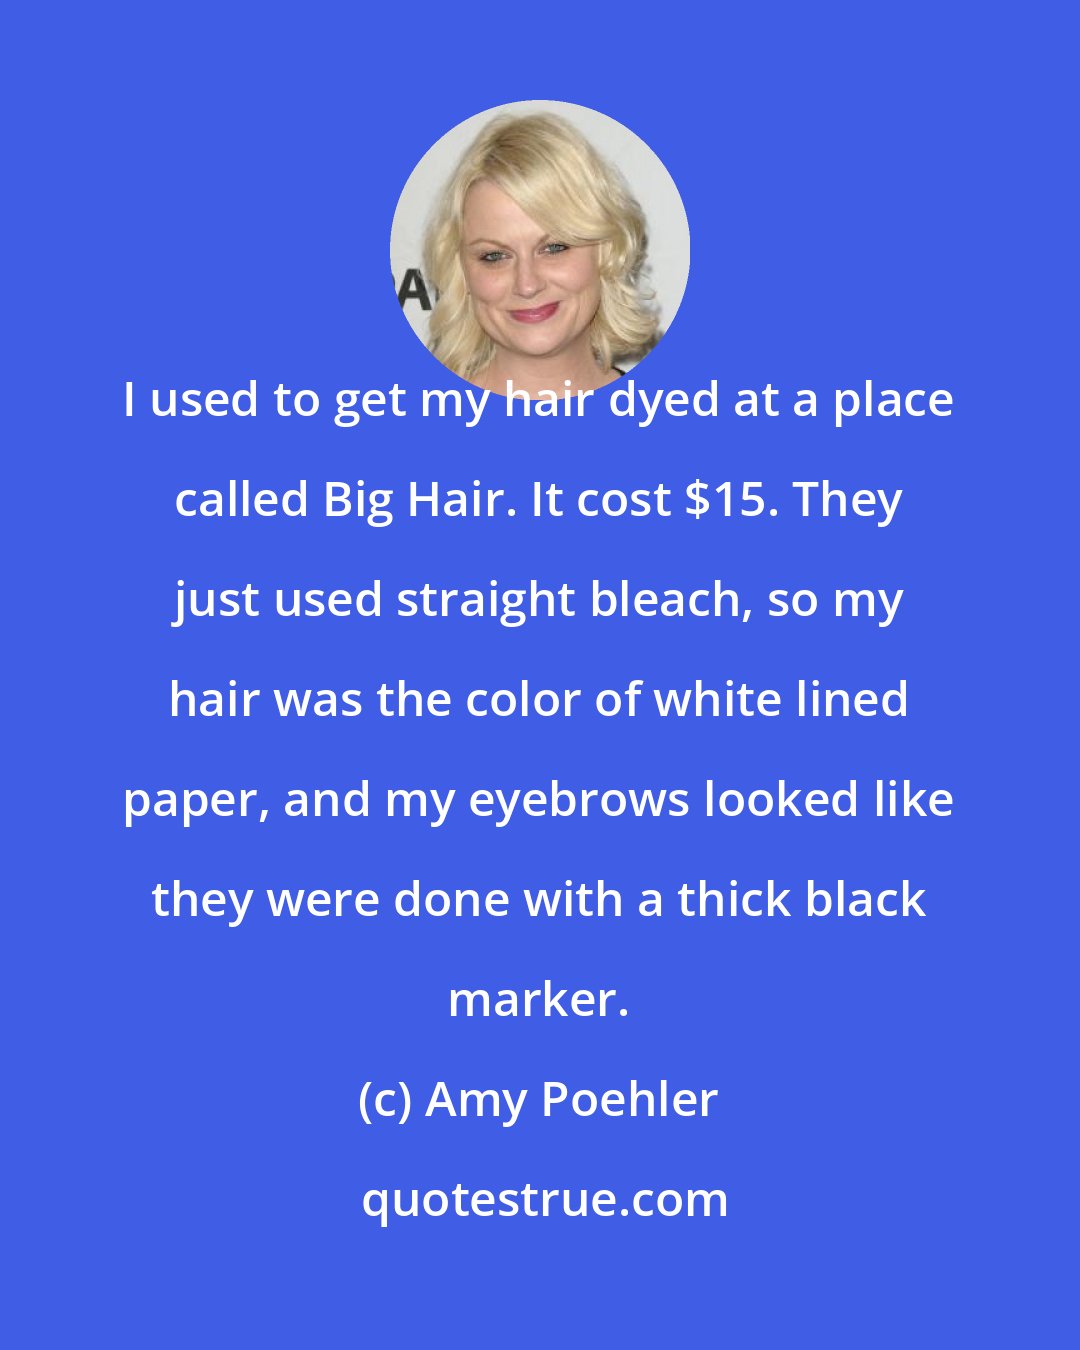 Amy Poehler: I used to get my hair dyed at a place called Big Hair. It cost $15. They just used straight bleach, so my hair was the color of white lined paper, and my eyebrows looked like they were done with a thick black marker.